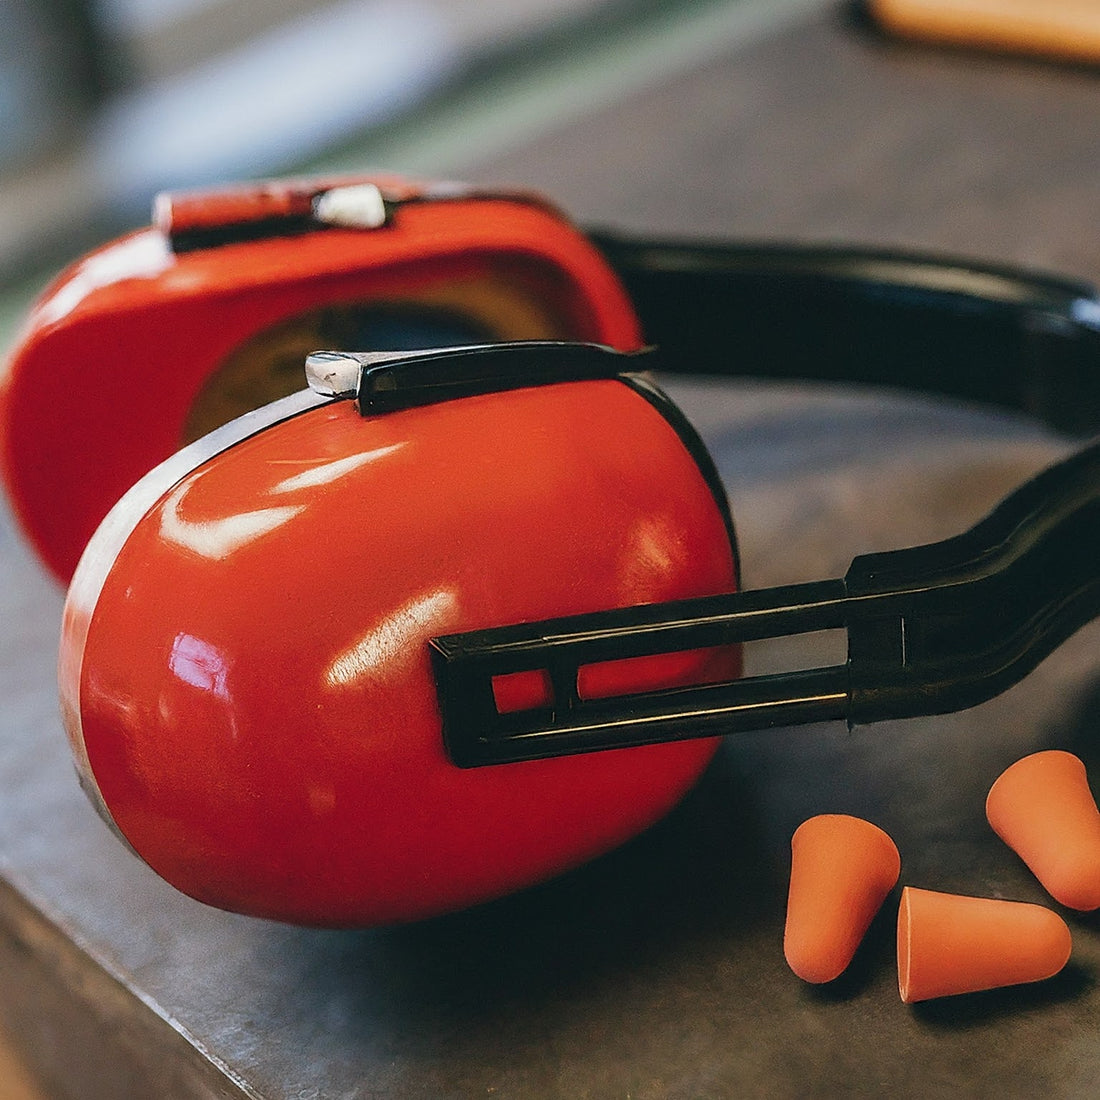 The Sound of Silence: Why Ear Muffs and Ear Plugs are Essential for Protecting Your Hearing